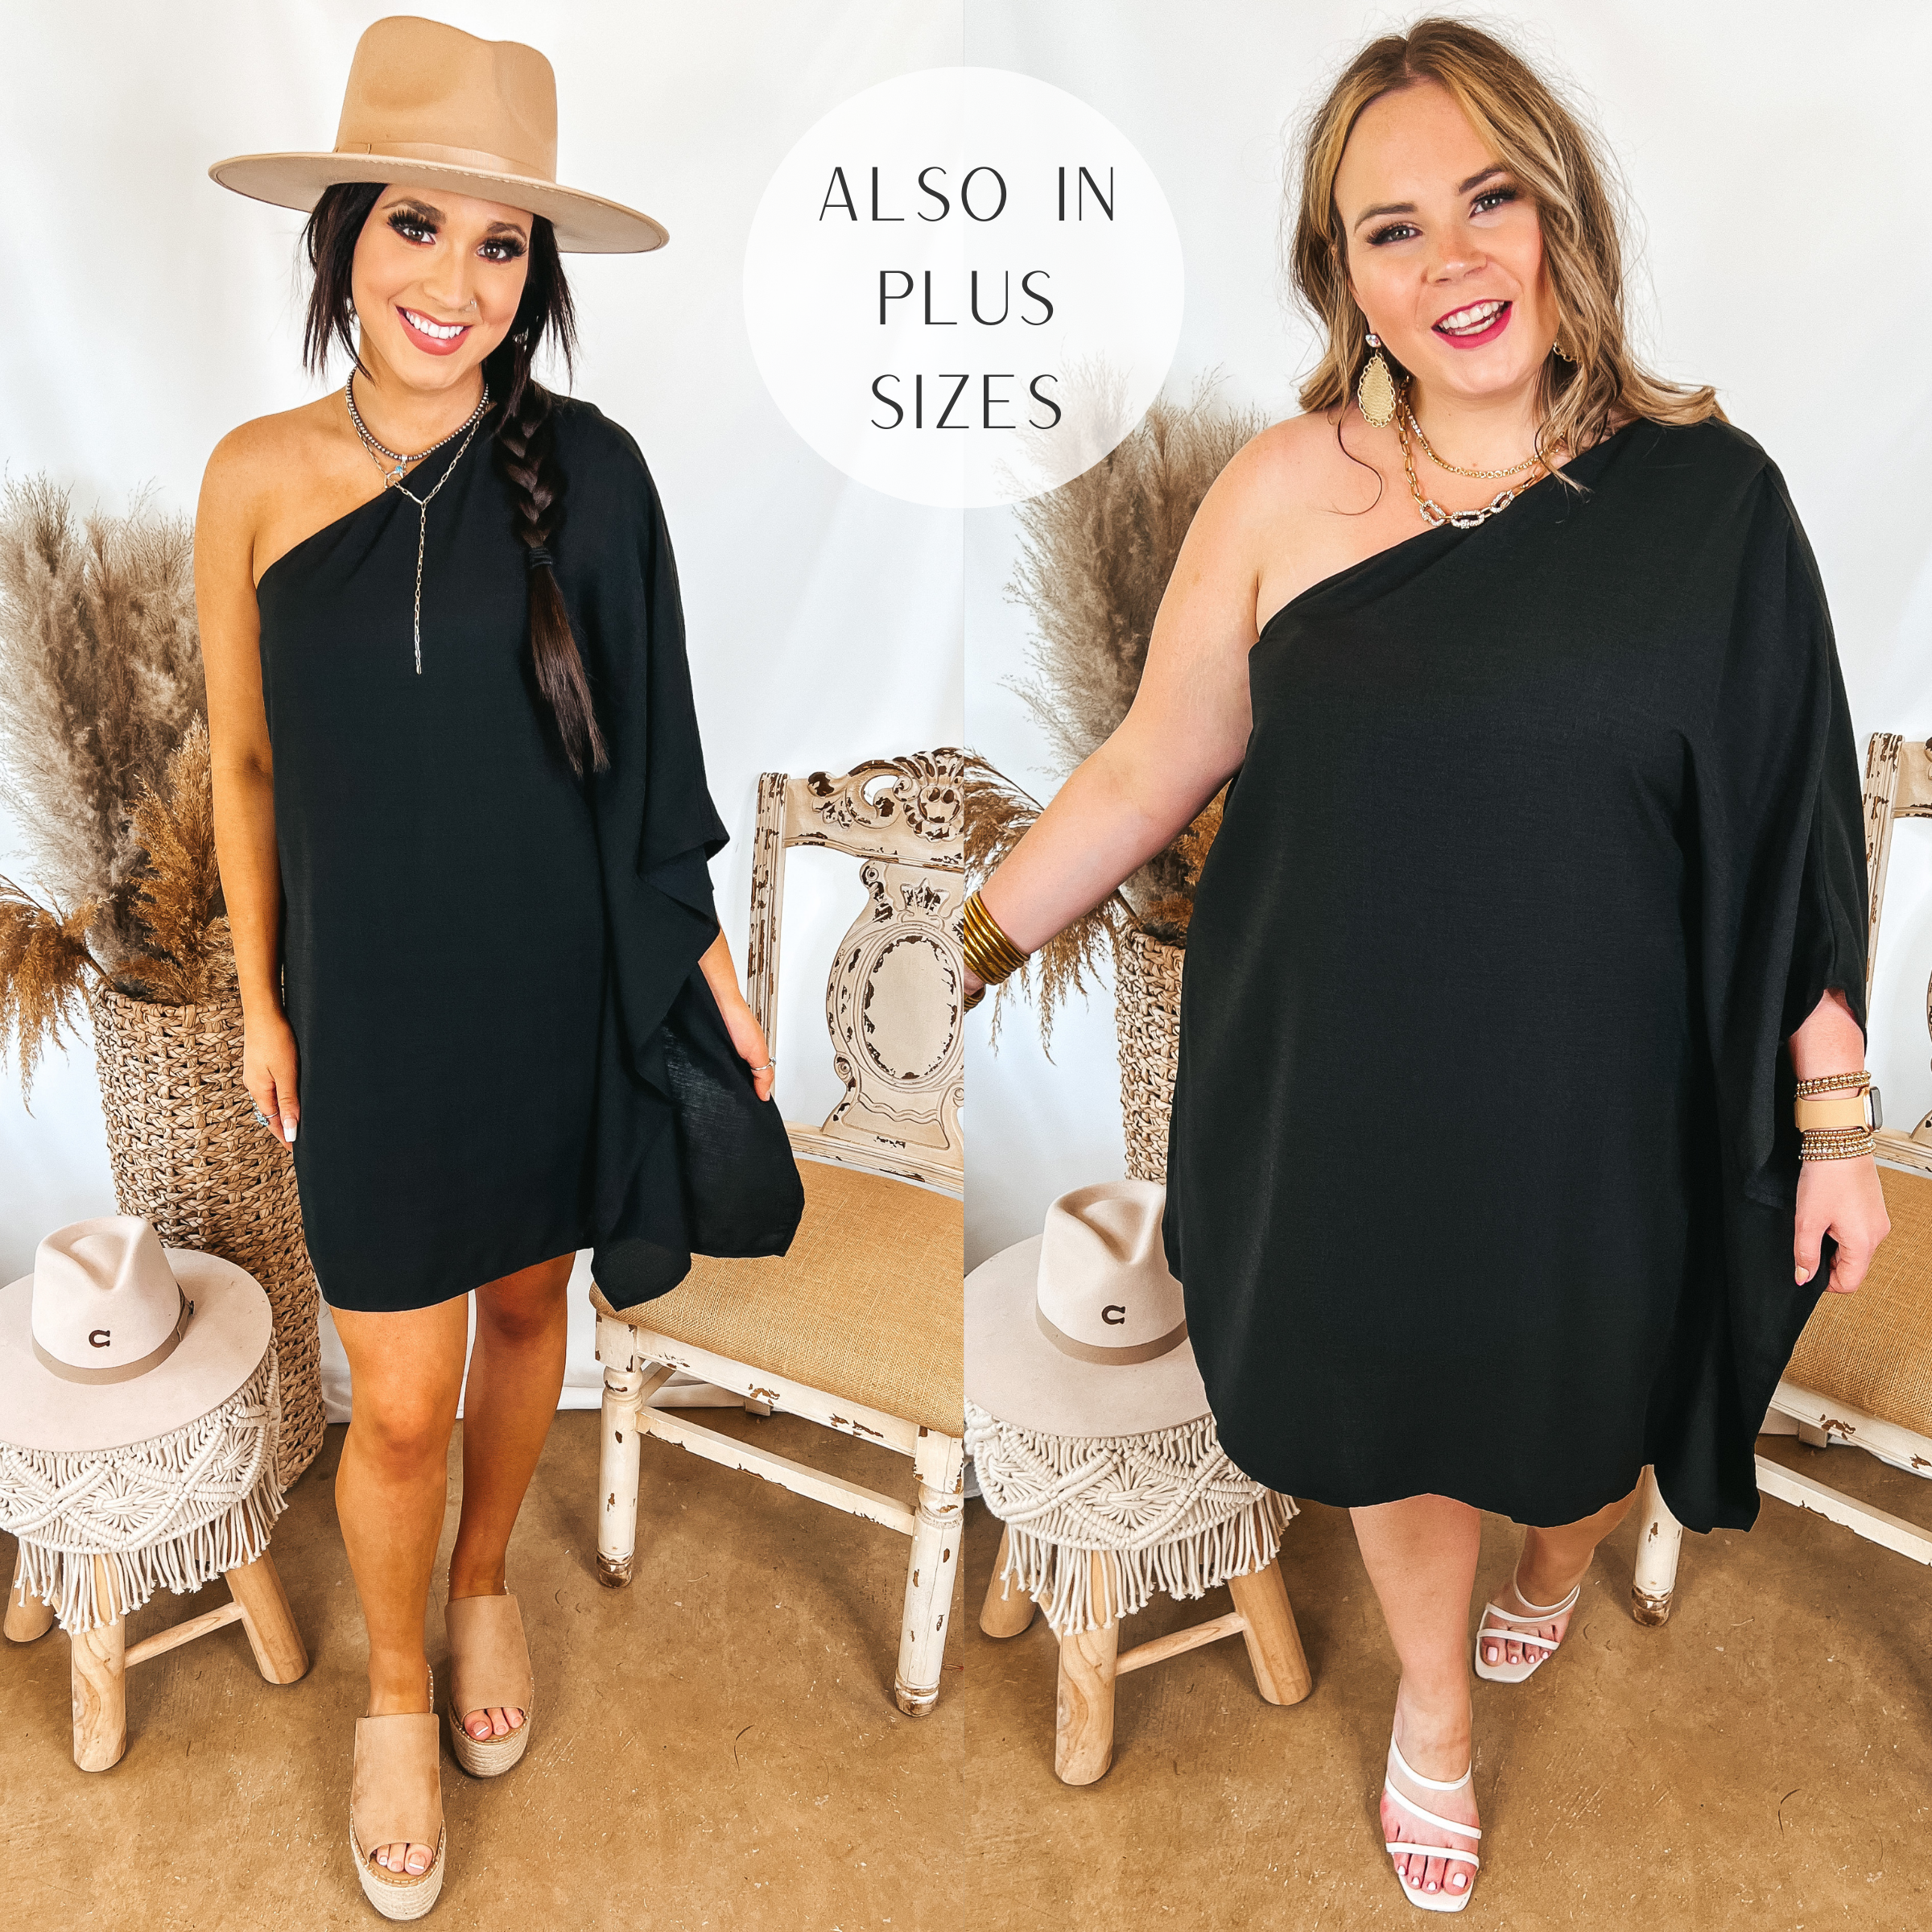 Models are wearing a black one shoulder drape dress. Size small model has it paired with tan wedges and a tan hat. SIze large model has it paired with white heels and gold jewelry.